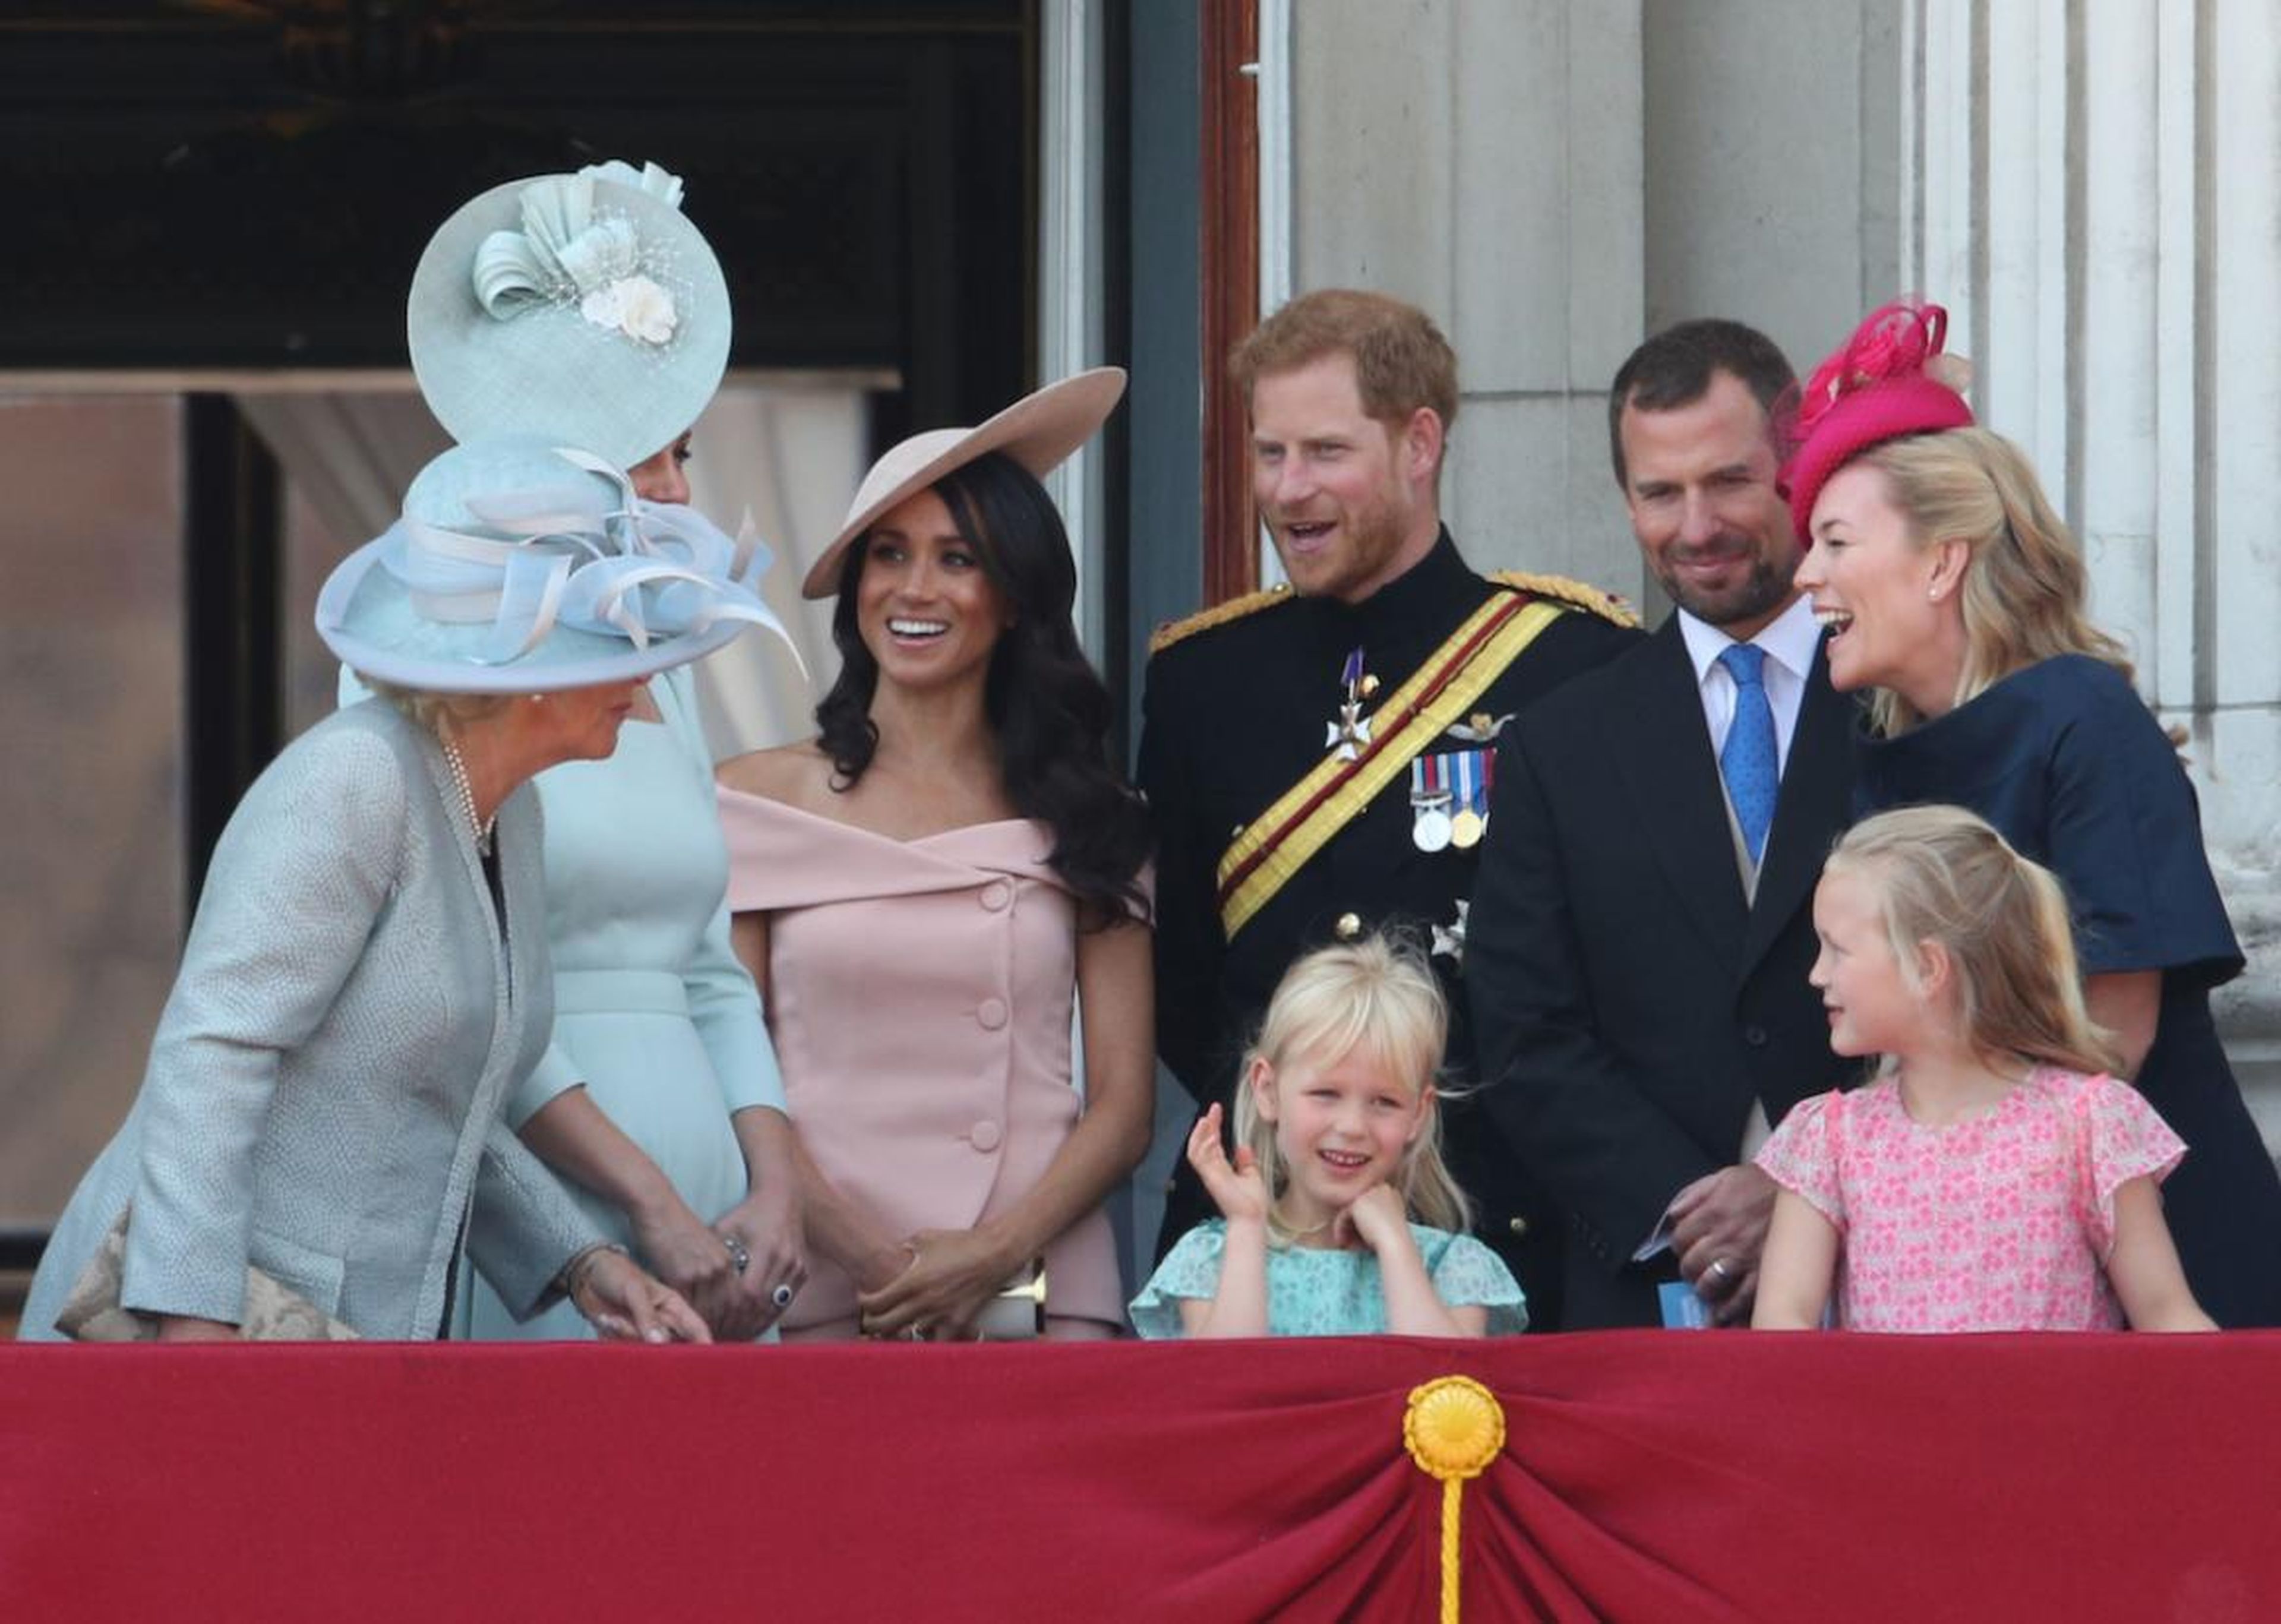 Meghan Markle married into the royal family in May 2018. Just a month after her wedding to Prince Harry, the royal was criticized for "breaking protocol" with an off-the-shoulder dress at the Trooping the Colour parade.